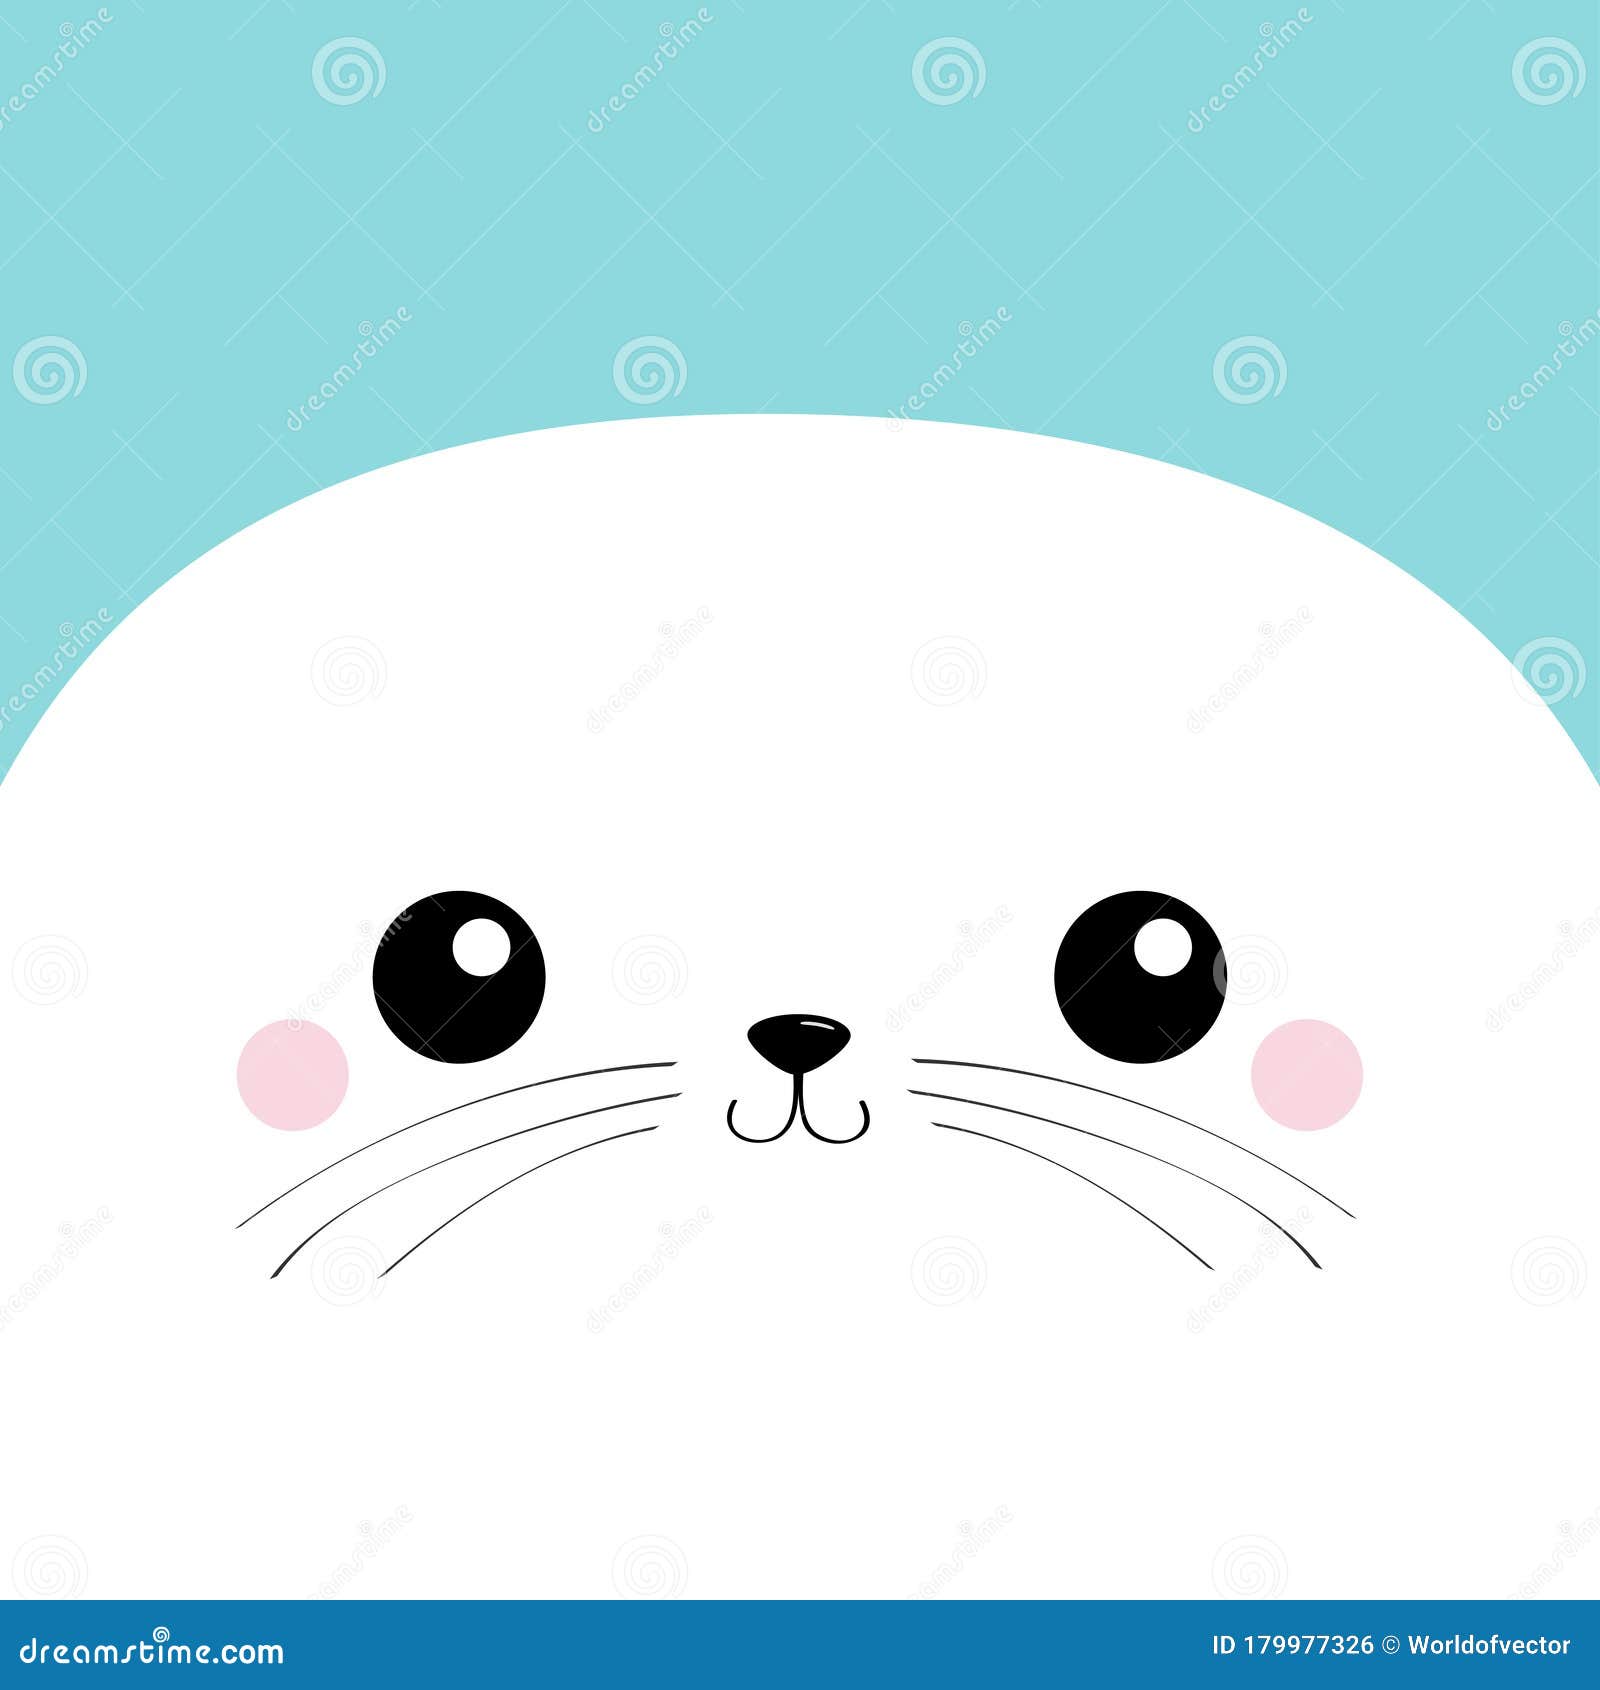 White Sea Lion Head Face Square Icon. Harp Seal Pup. Pet Baby Print for  Notebook Cover, Greeting Card Stock Vector - Illustration of childish,  book: 179977326